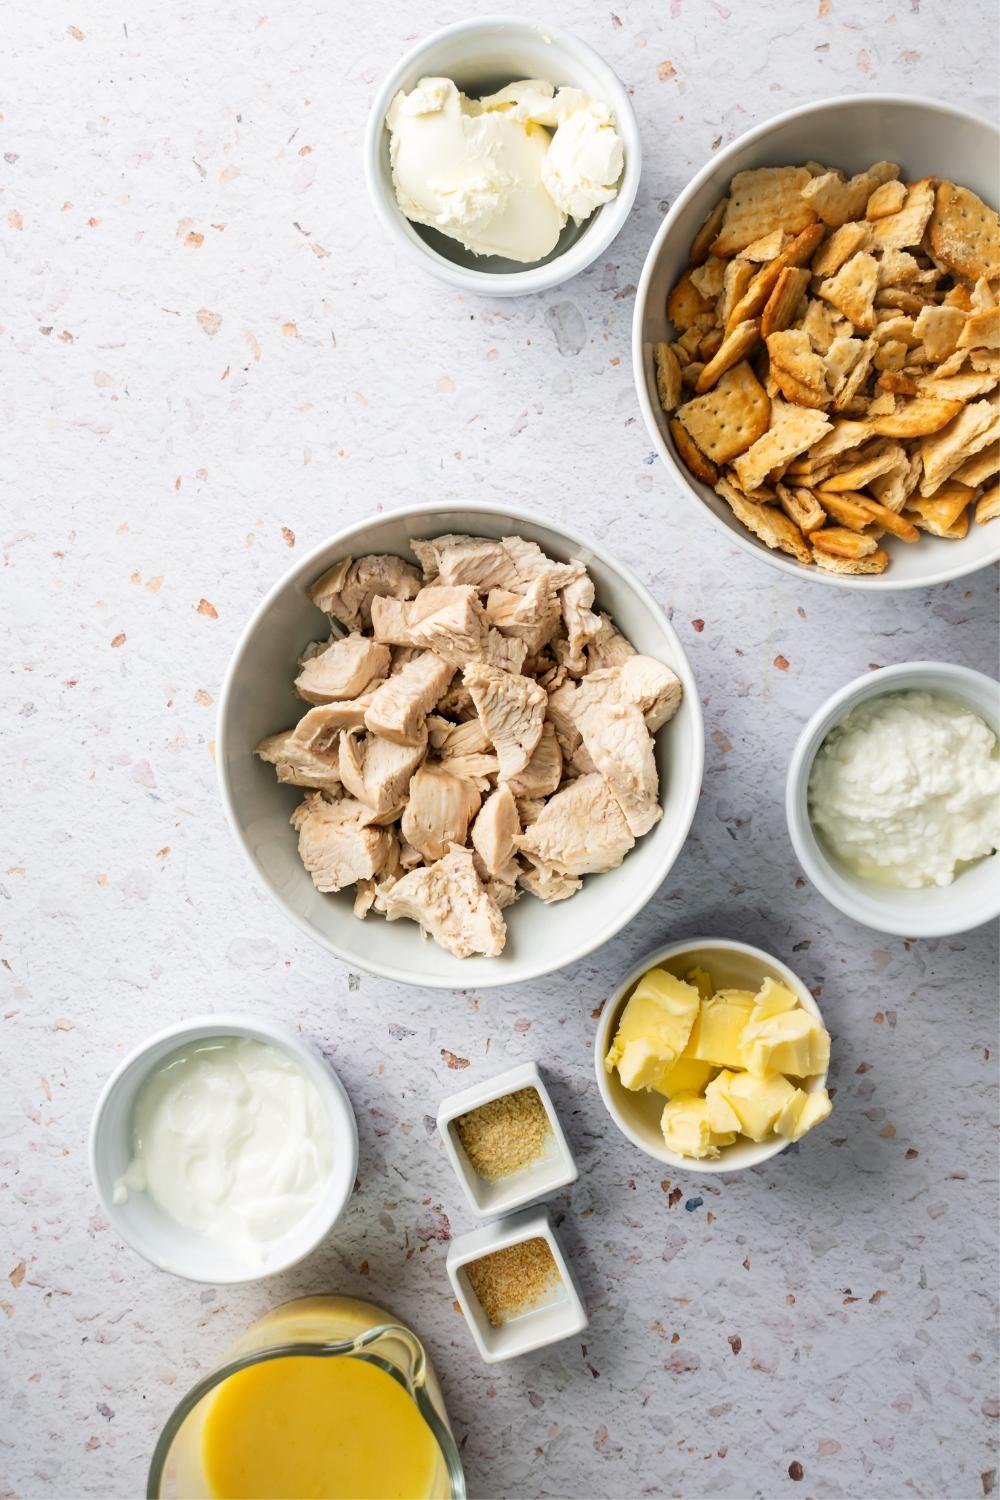 A bowl of sour cream, a bowl of butter, a bowl of cottage cheese, a bowl of chicken pieces, a bowl of crushed Ritz crackers, and a bowl of cream cheese all on a white counter.